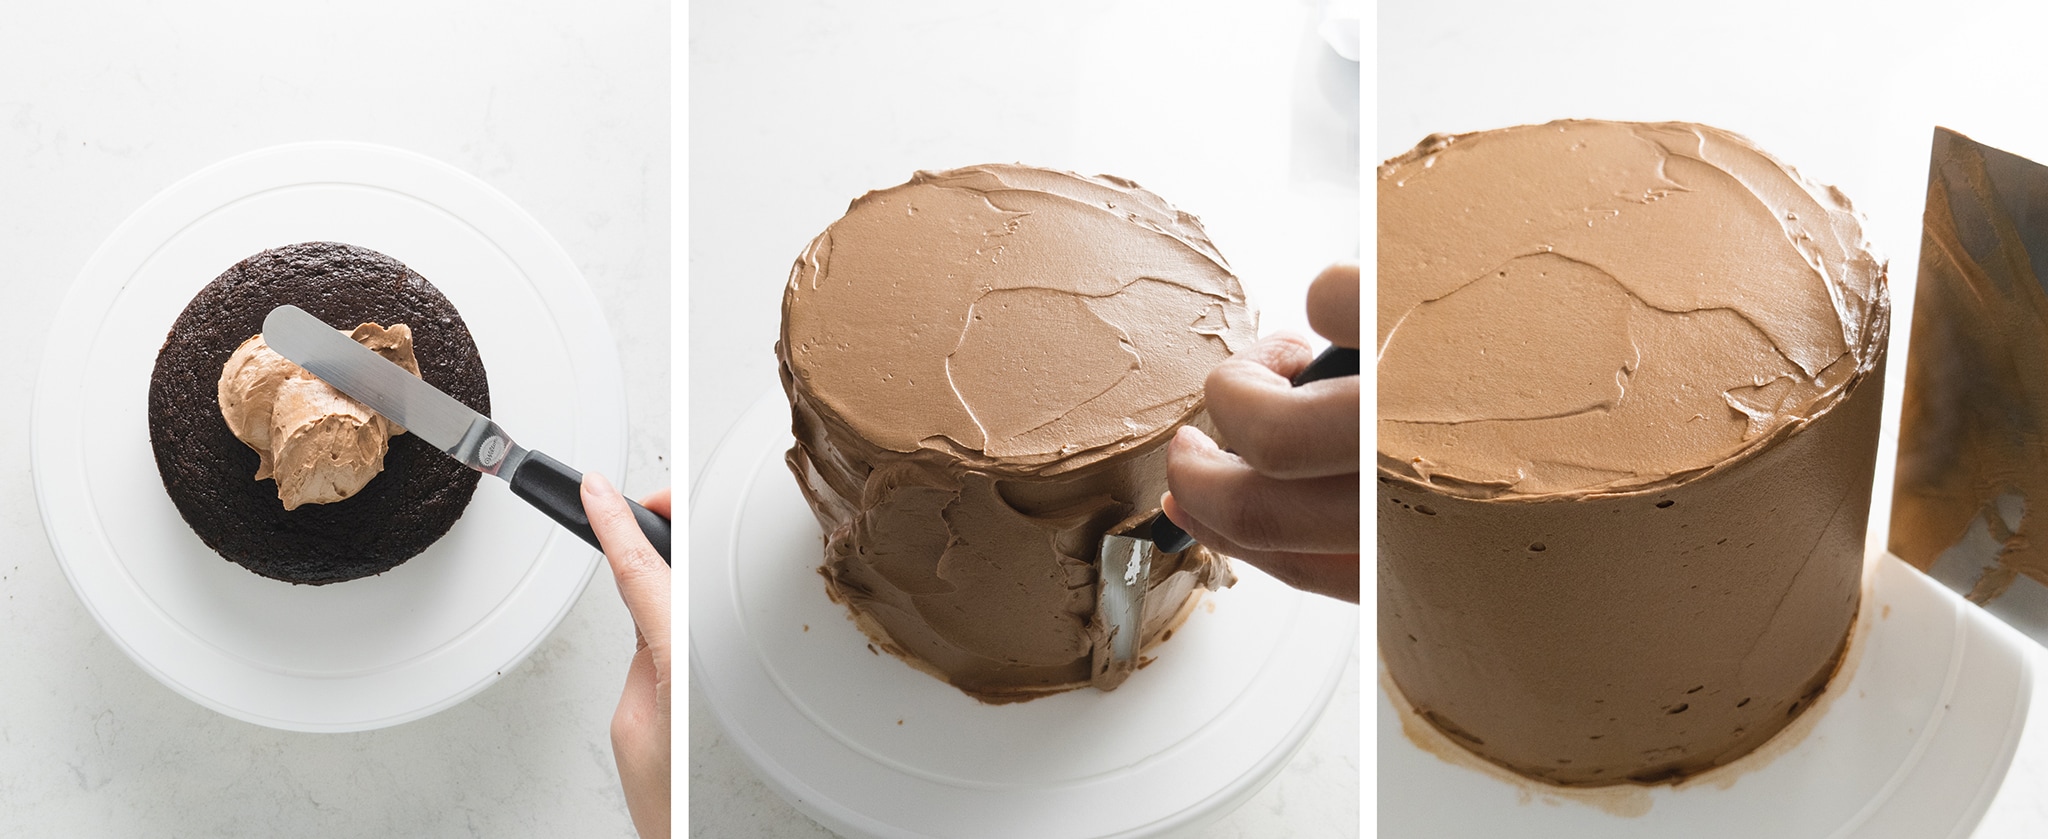 frosting chocolate cake with chocolate buttercream